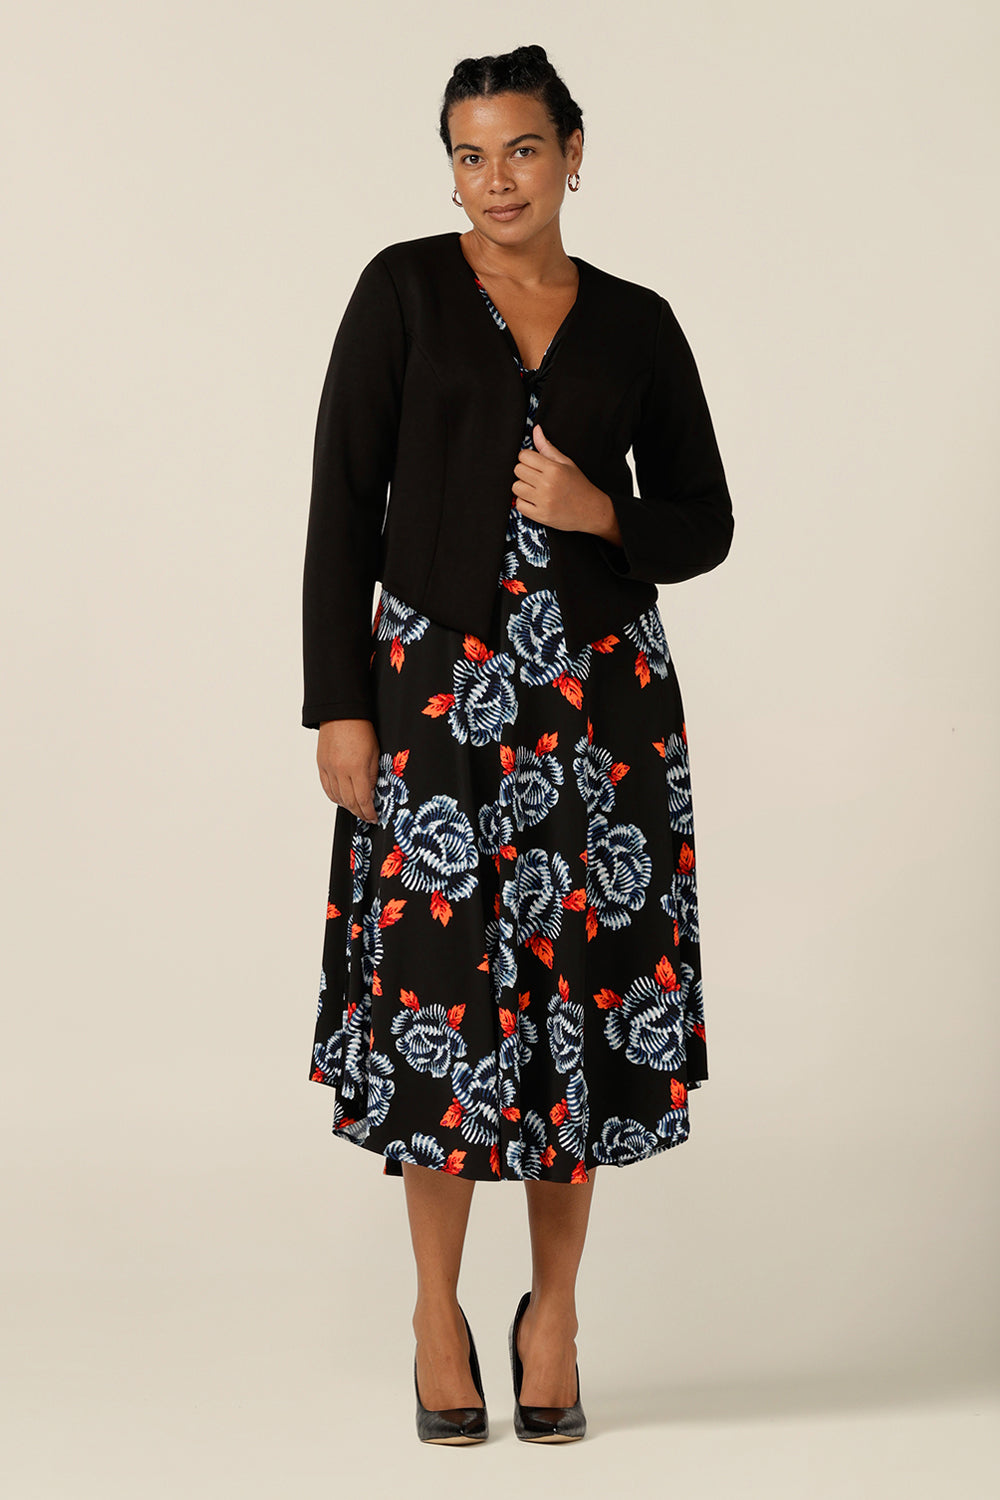 Wear it for work - a 3/4 sleeve, empire line dress in black-base floral print jersey is worn under a black soft tailoring jacket. shop L&F work dresses and jackets in sizes 8 to size 24.